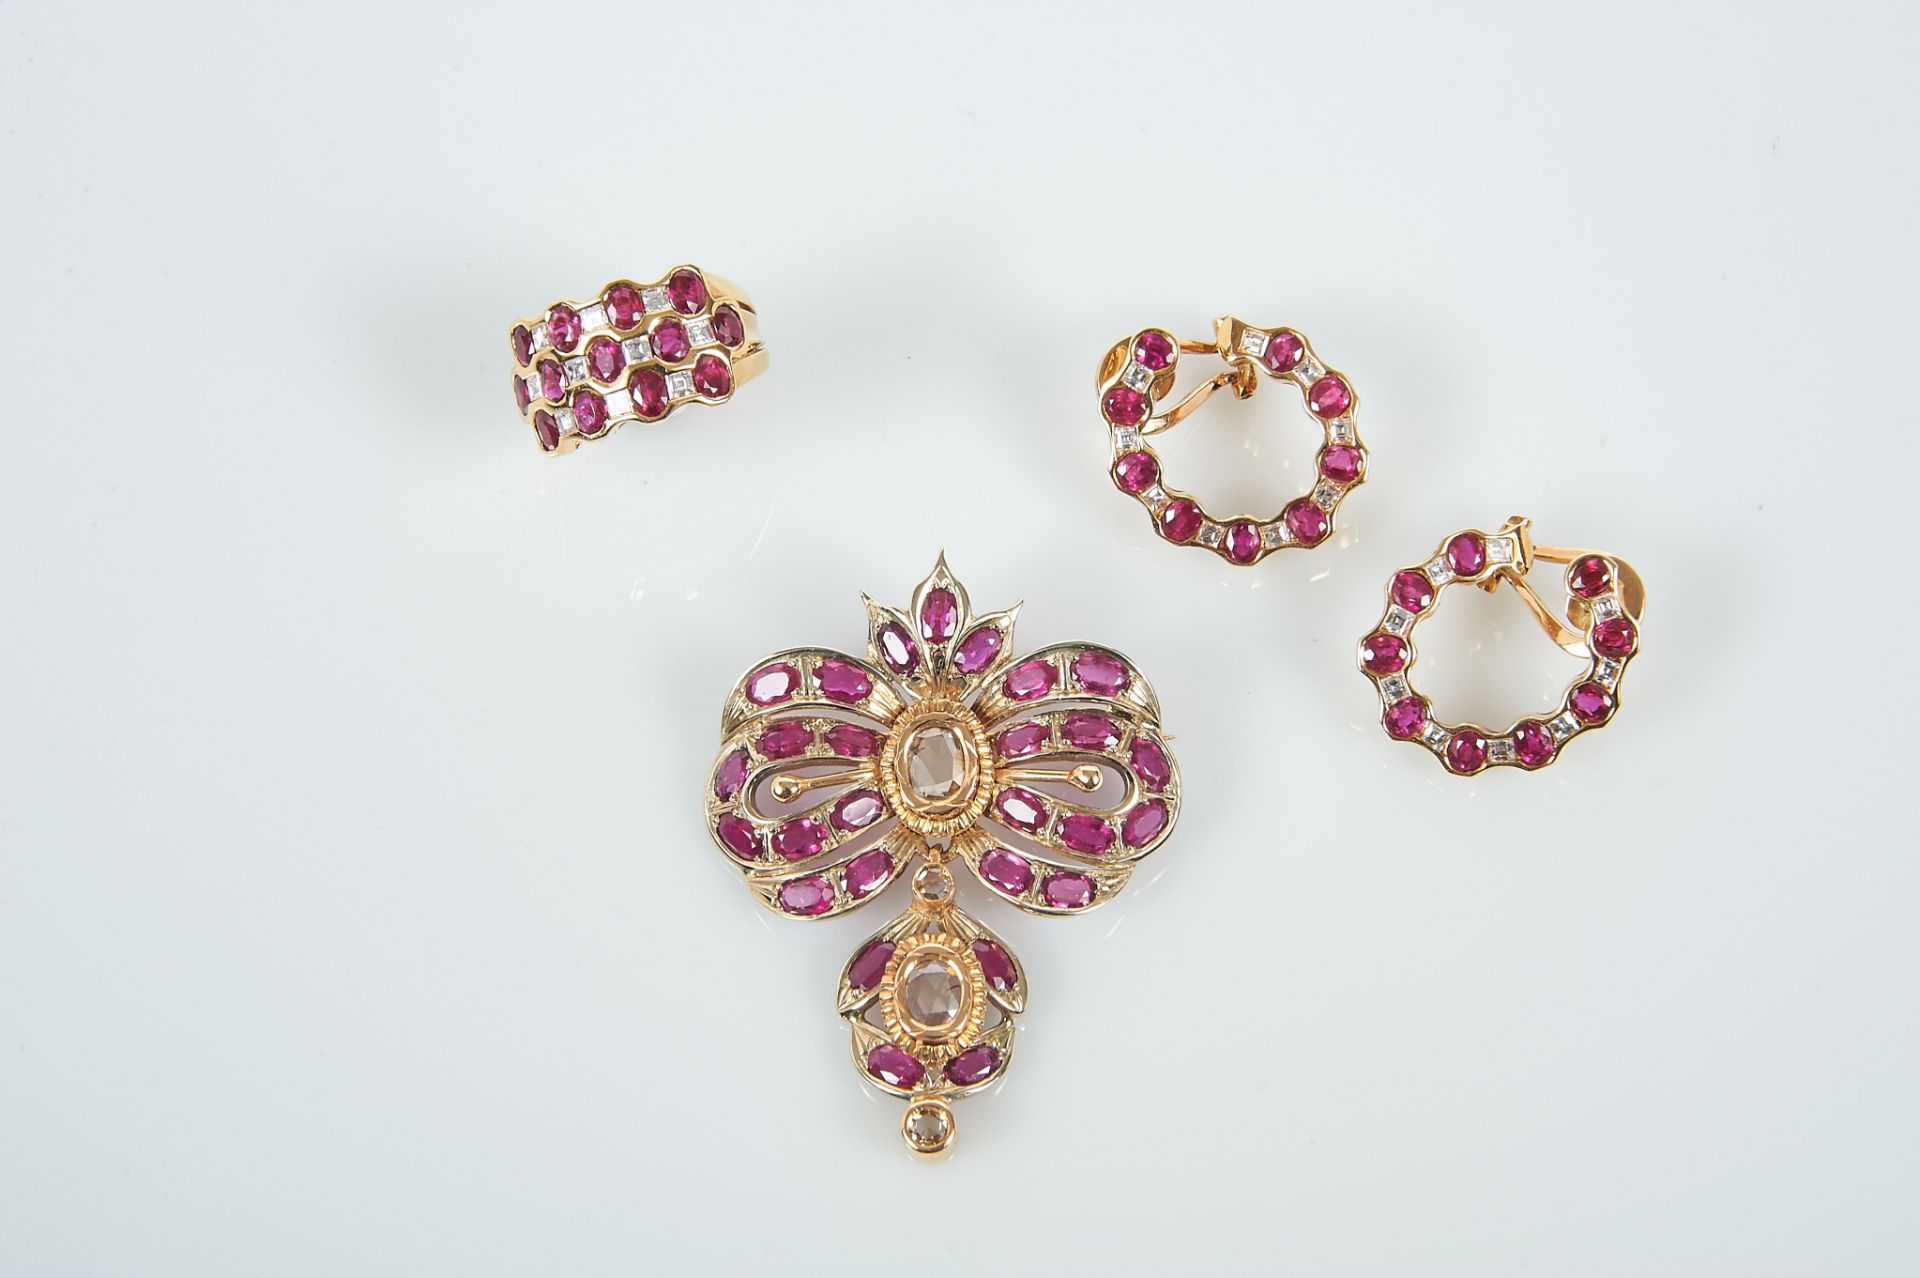 A Ring and a Pair of Earrings, 800/1000 gold, set with 31 oval cut rubies with the approximate